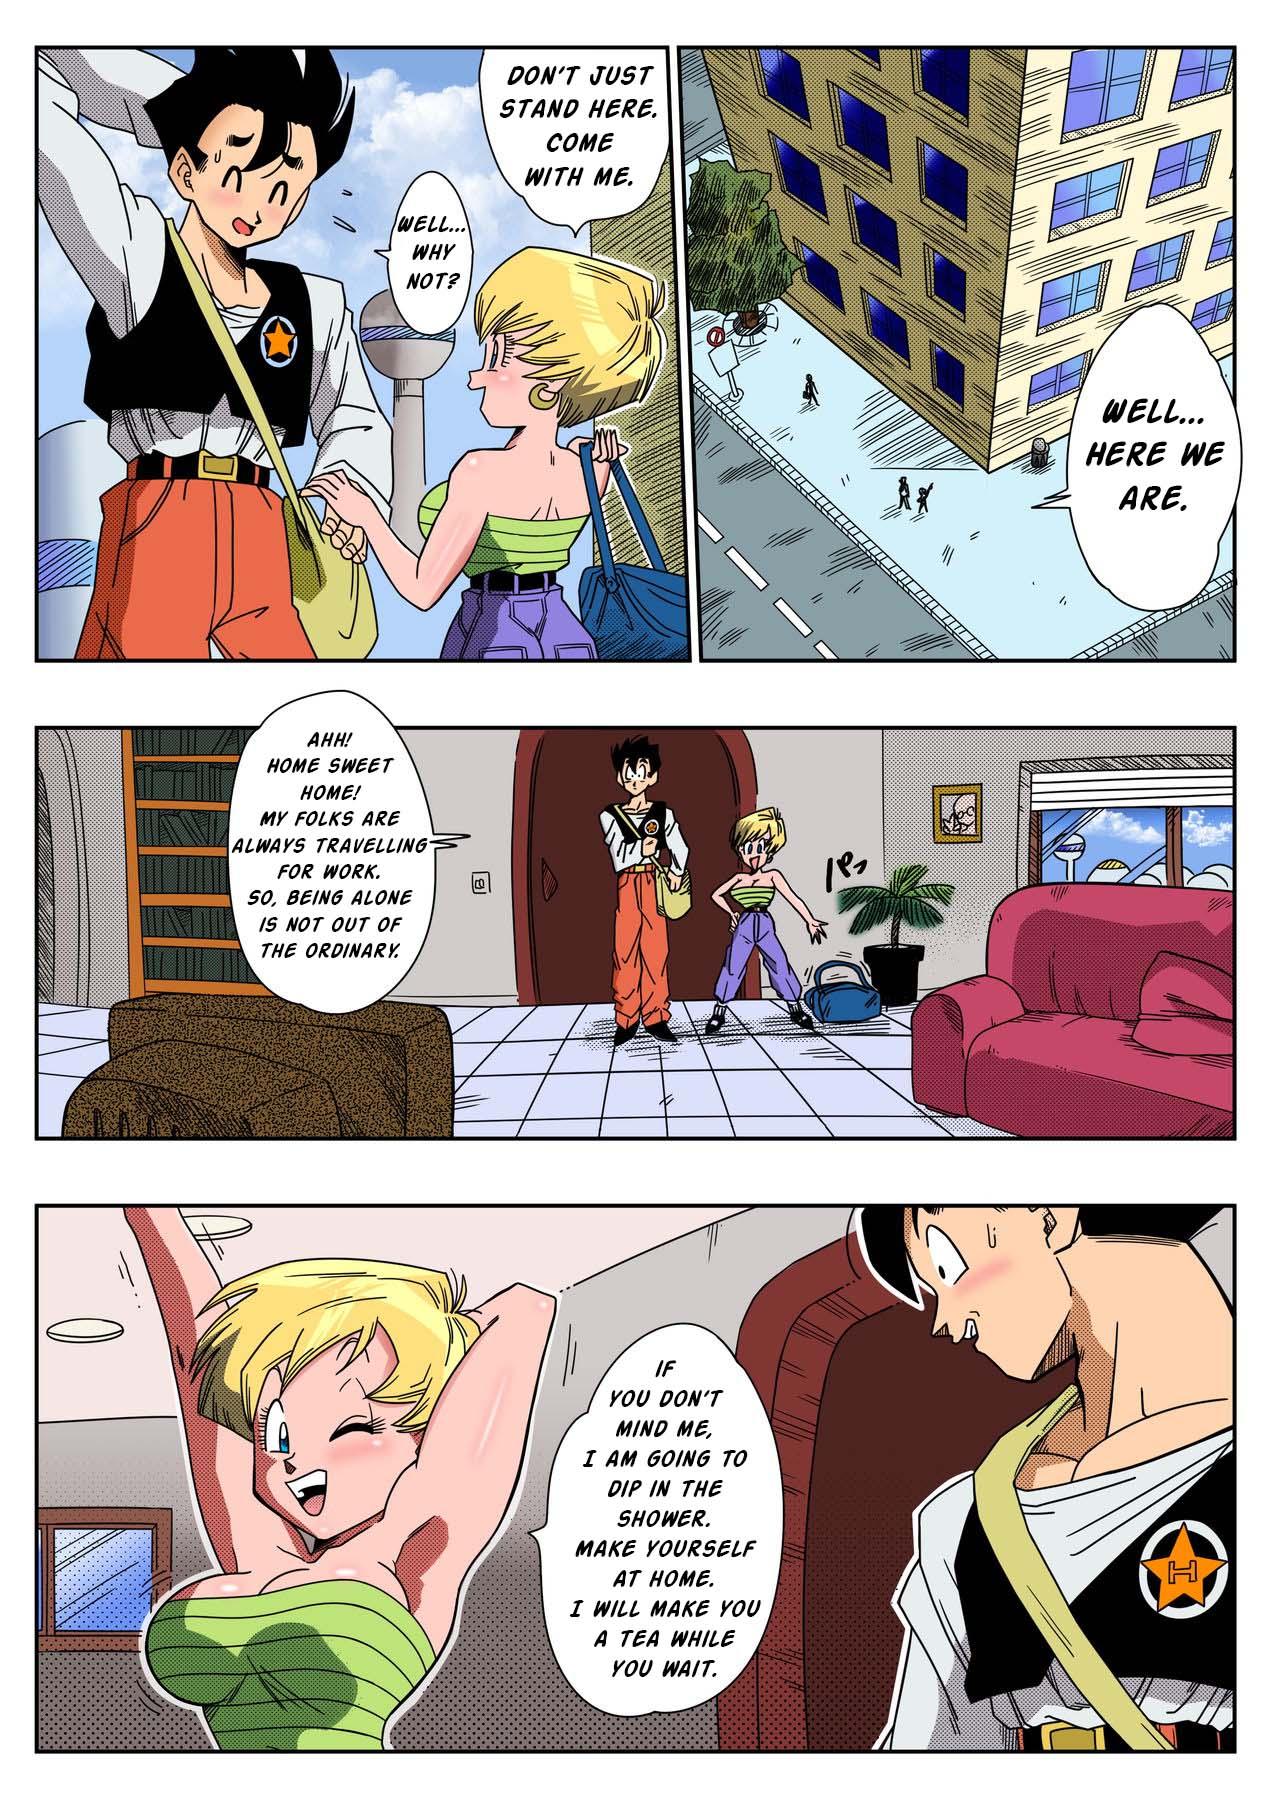 Whores LOVE TRIANGLE Z Part 1-4 - Dragon ball z Costume - Page 6